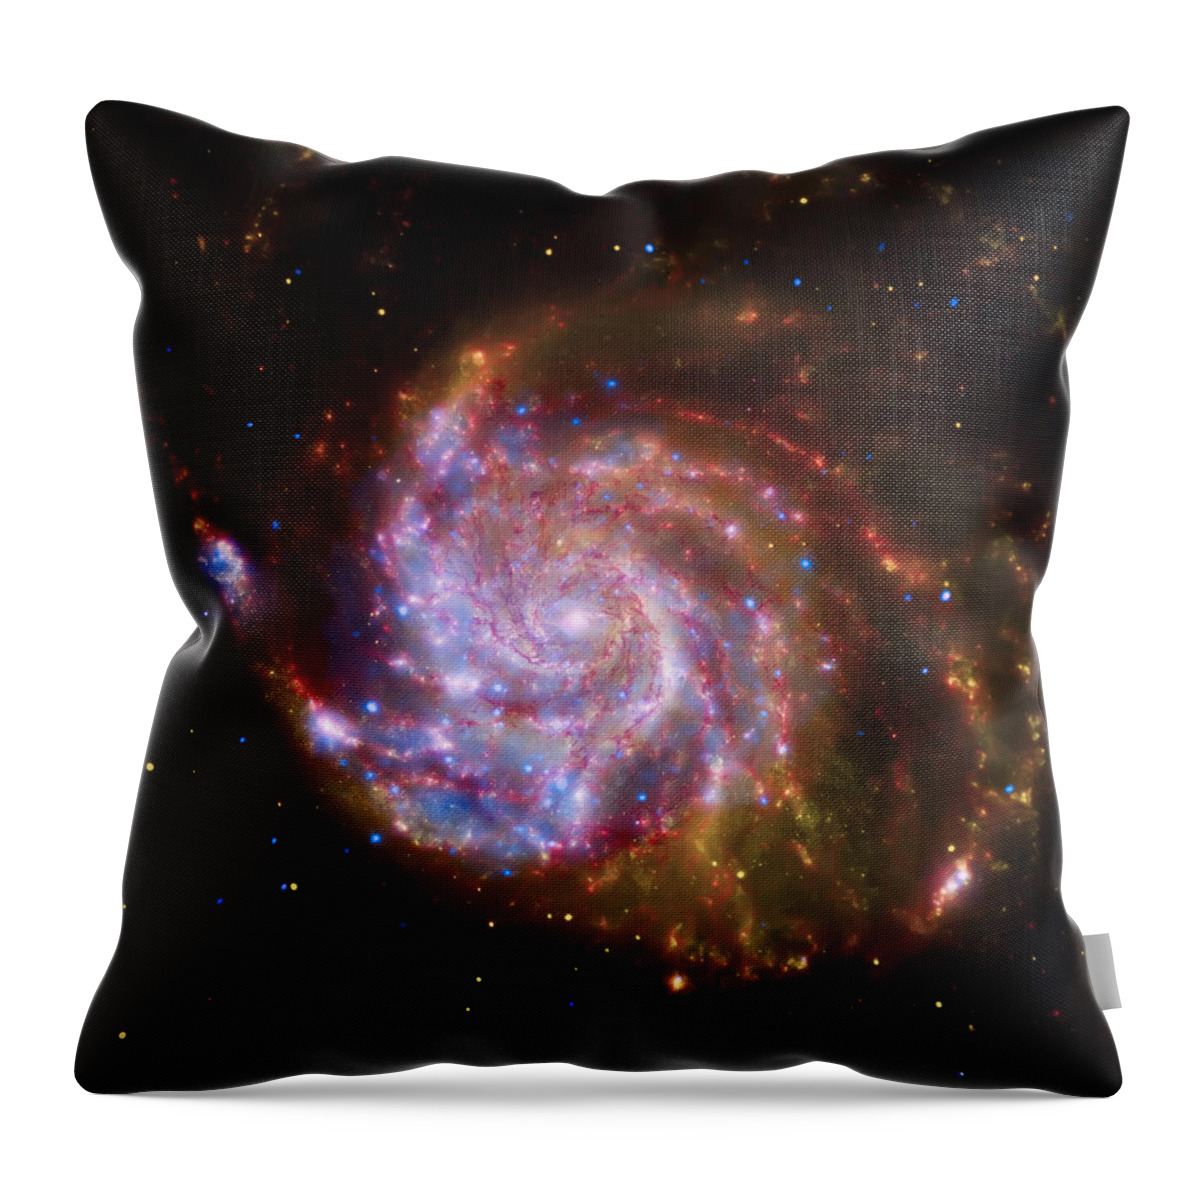 Universe Throw Pillow featuring the photograph Swirling Red Galaxy by Jennifer Rondinelli Reilly - Fine Art Photography